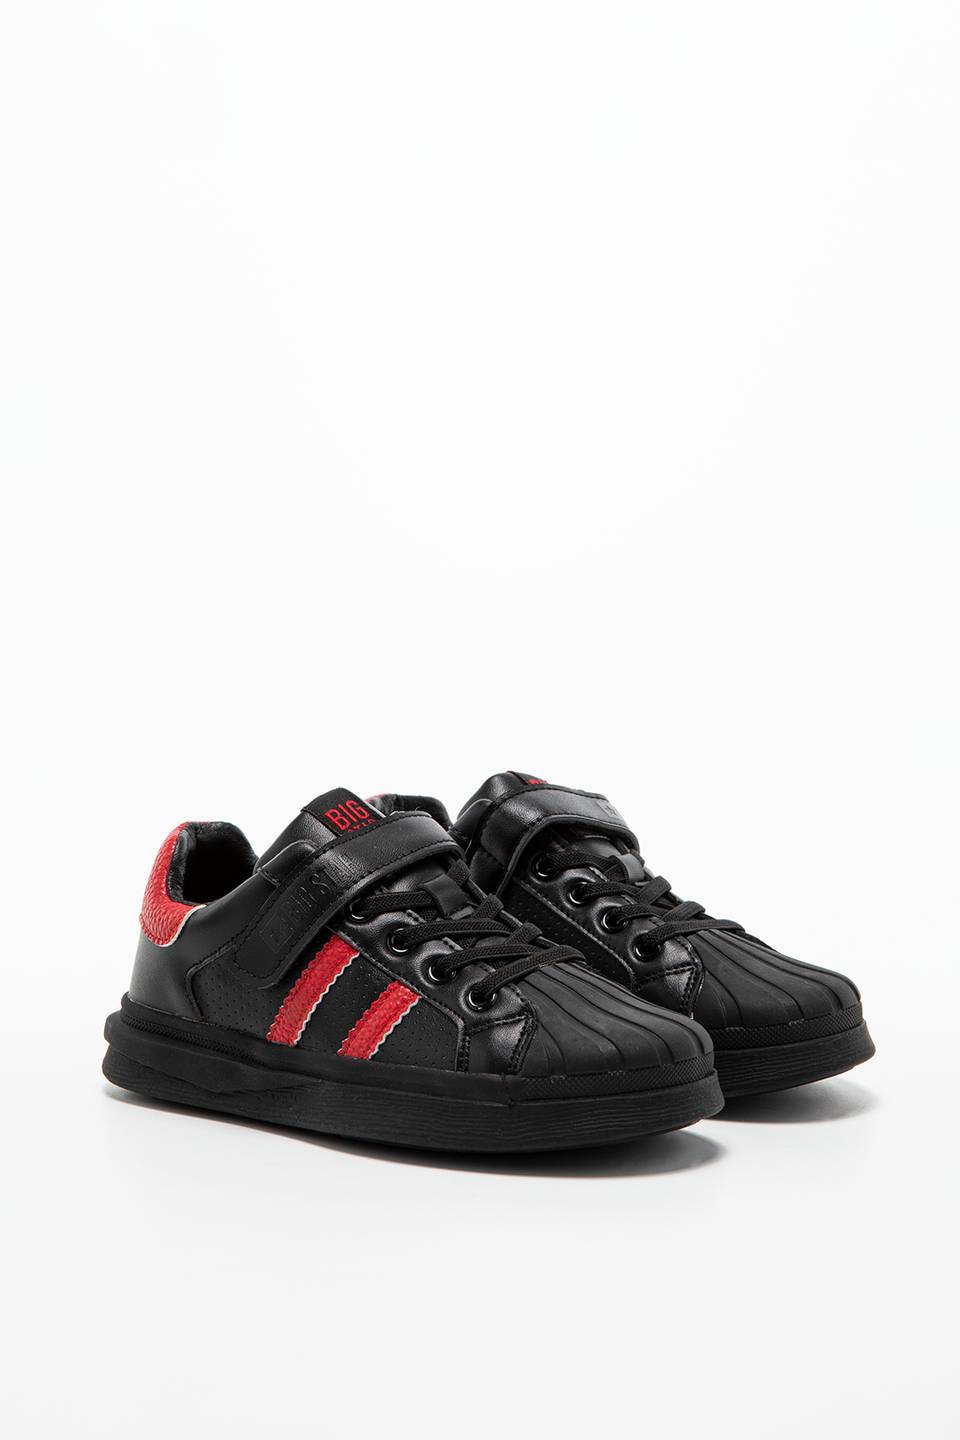 Sneakers Big Star GG374022-BLACK/RED